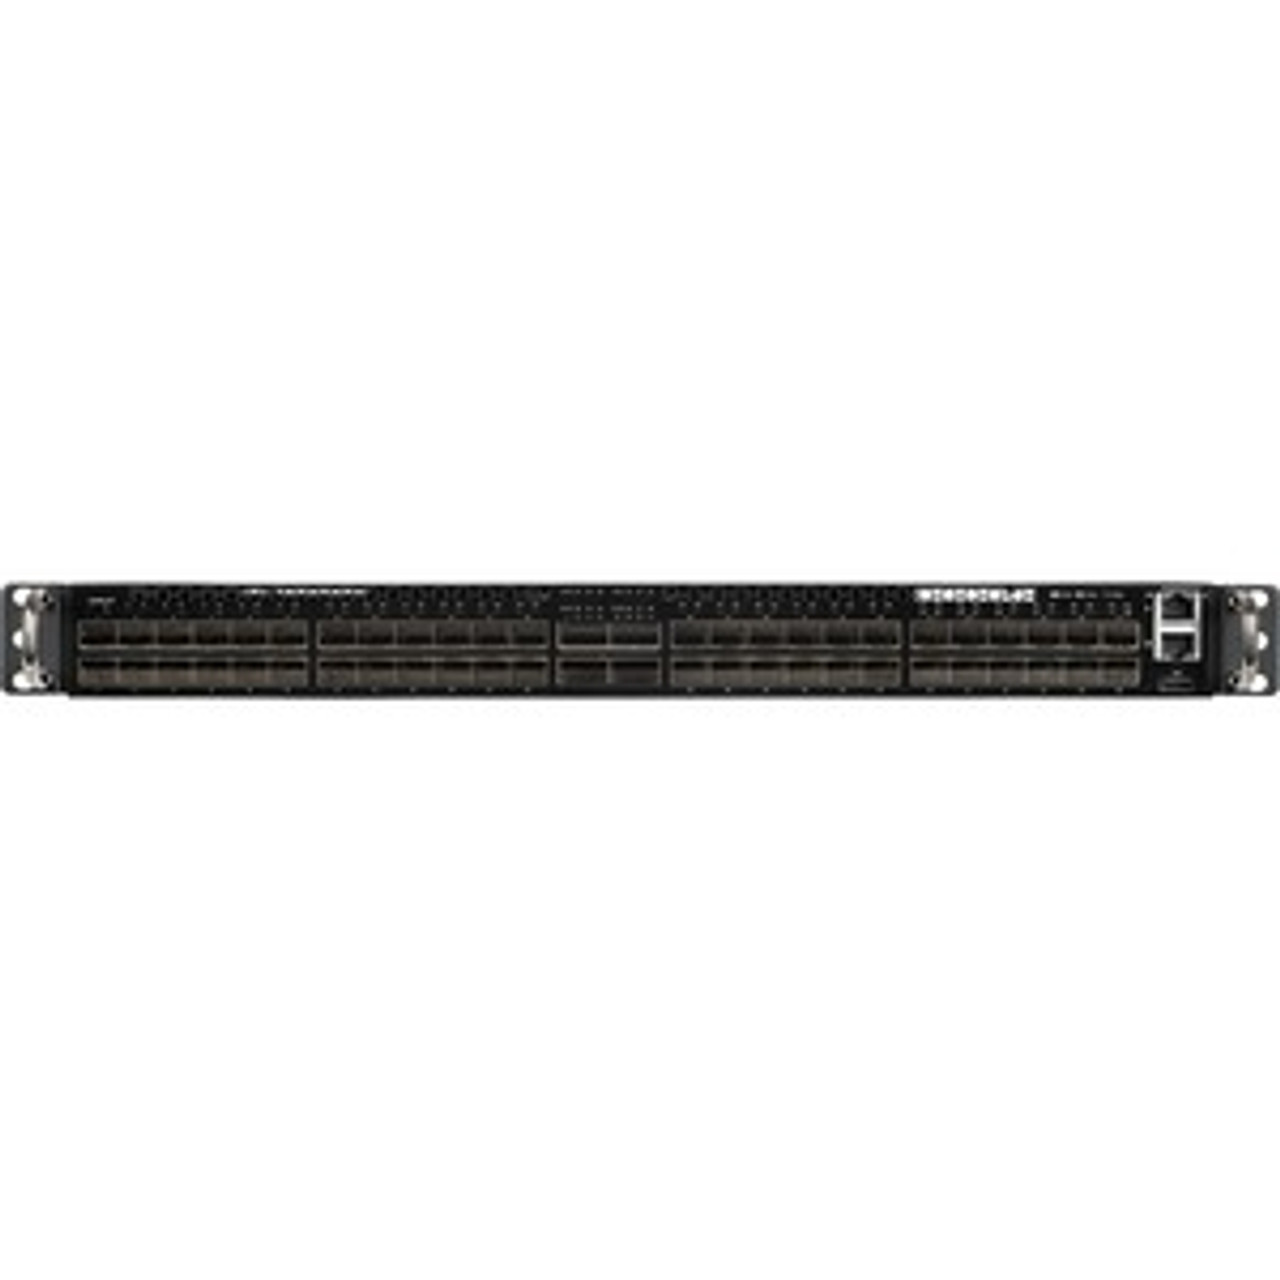 1LY8BZZ0STI QCT QuantaMesh T3048-LY8 Layer 3 Switch - Manageable - 4 Layer Supported - Modular - Optical Fiber - 1U High - Rail-mountable,  (Refurbished)